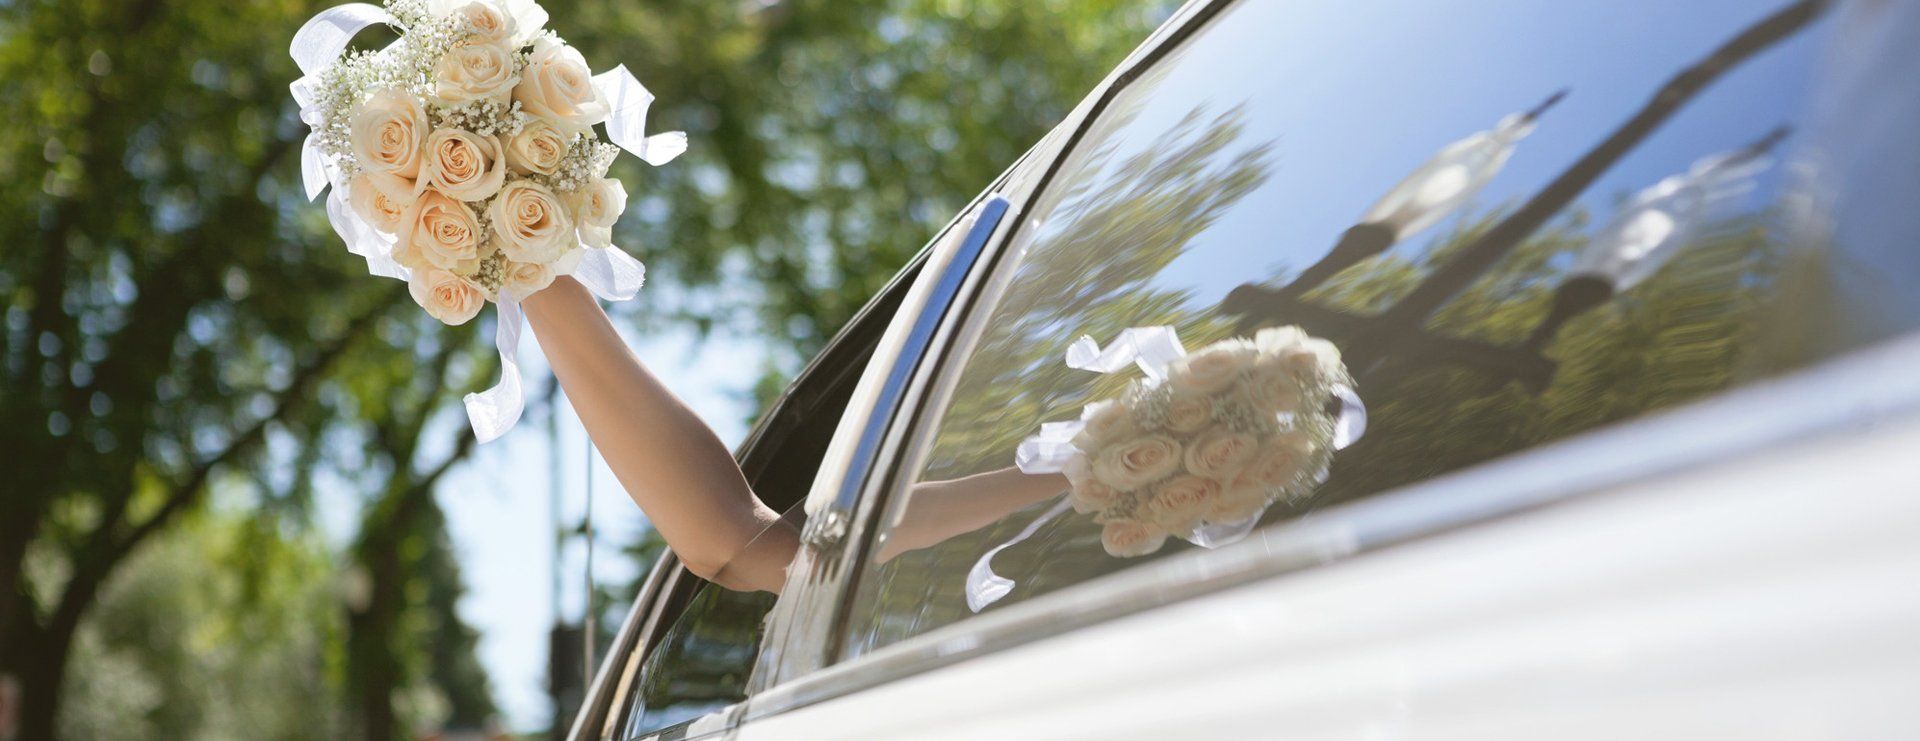 Wedding Hire Taxis